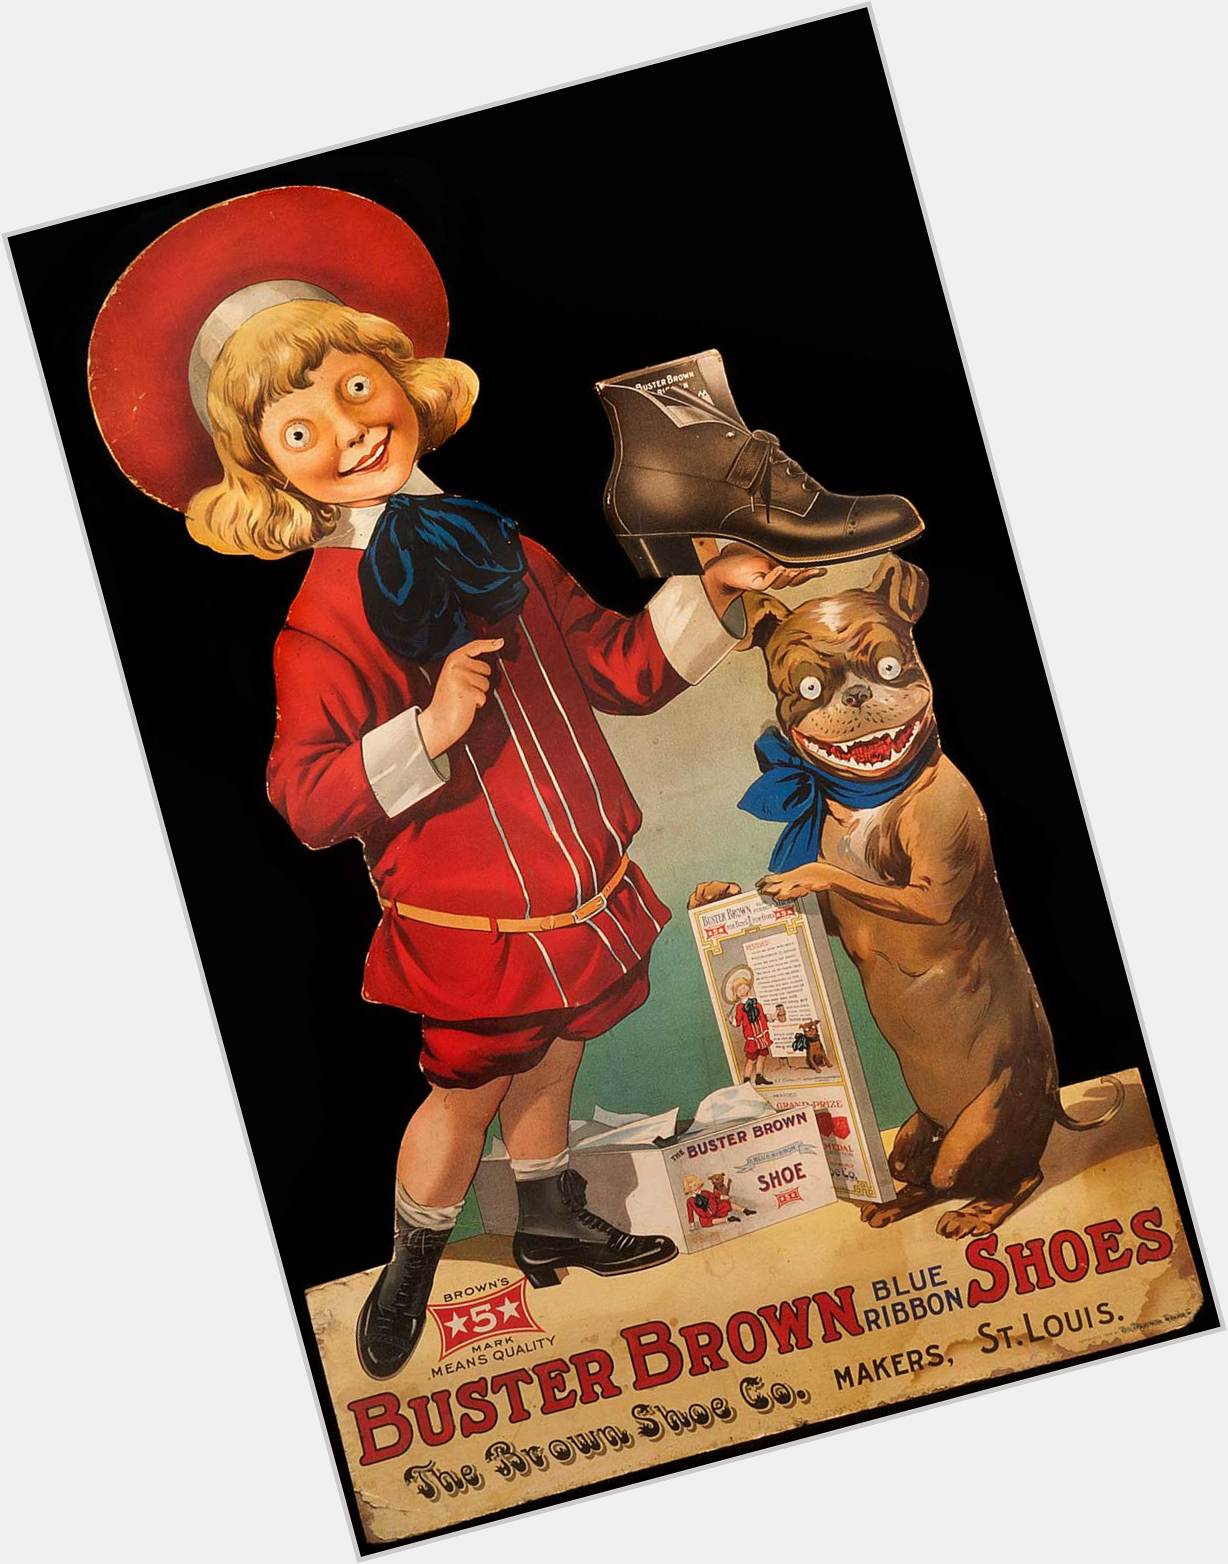 <a href="/hot-men/buster-brown/where-dating-news-photos">Buster Brown</a>  